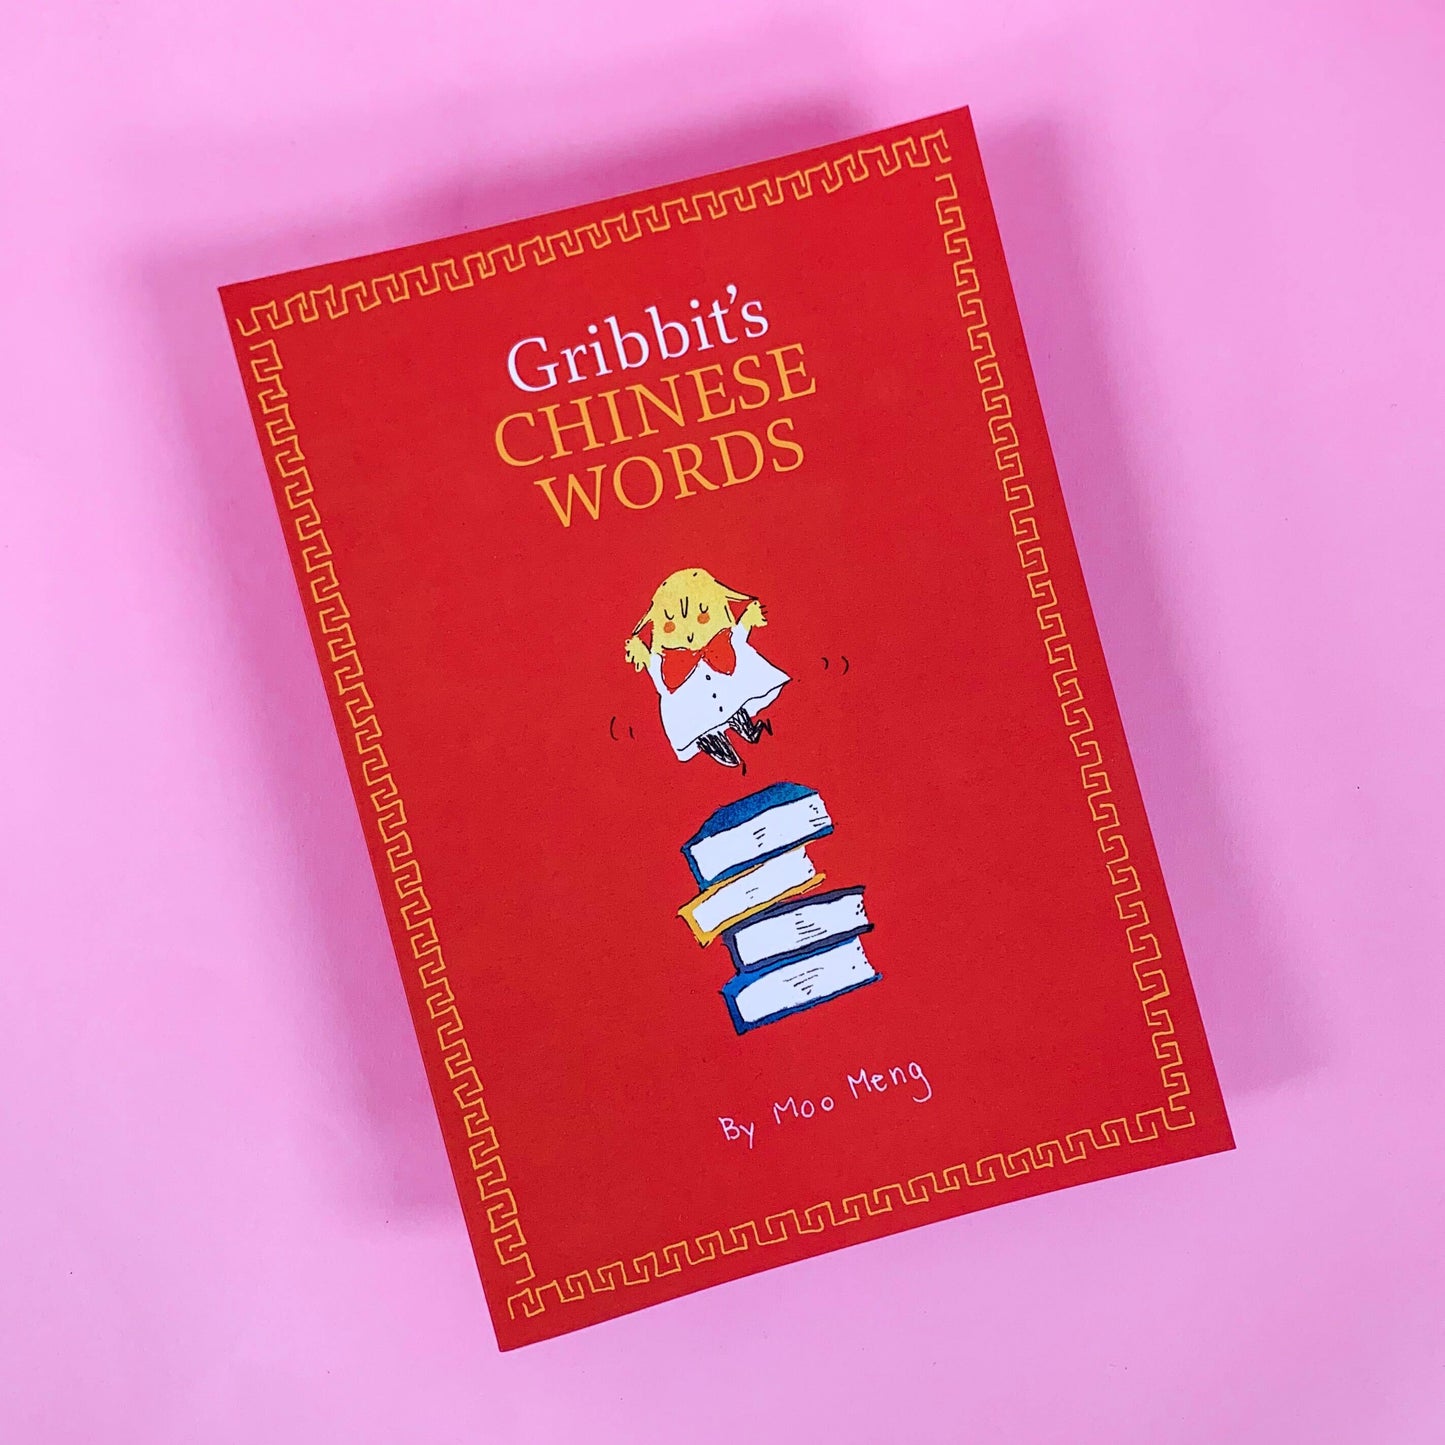 Gribbit's Chinese Words by Moo Meng